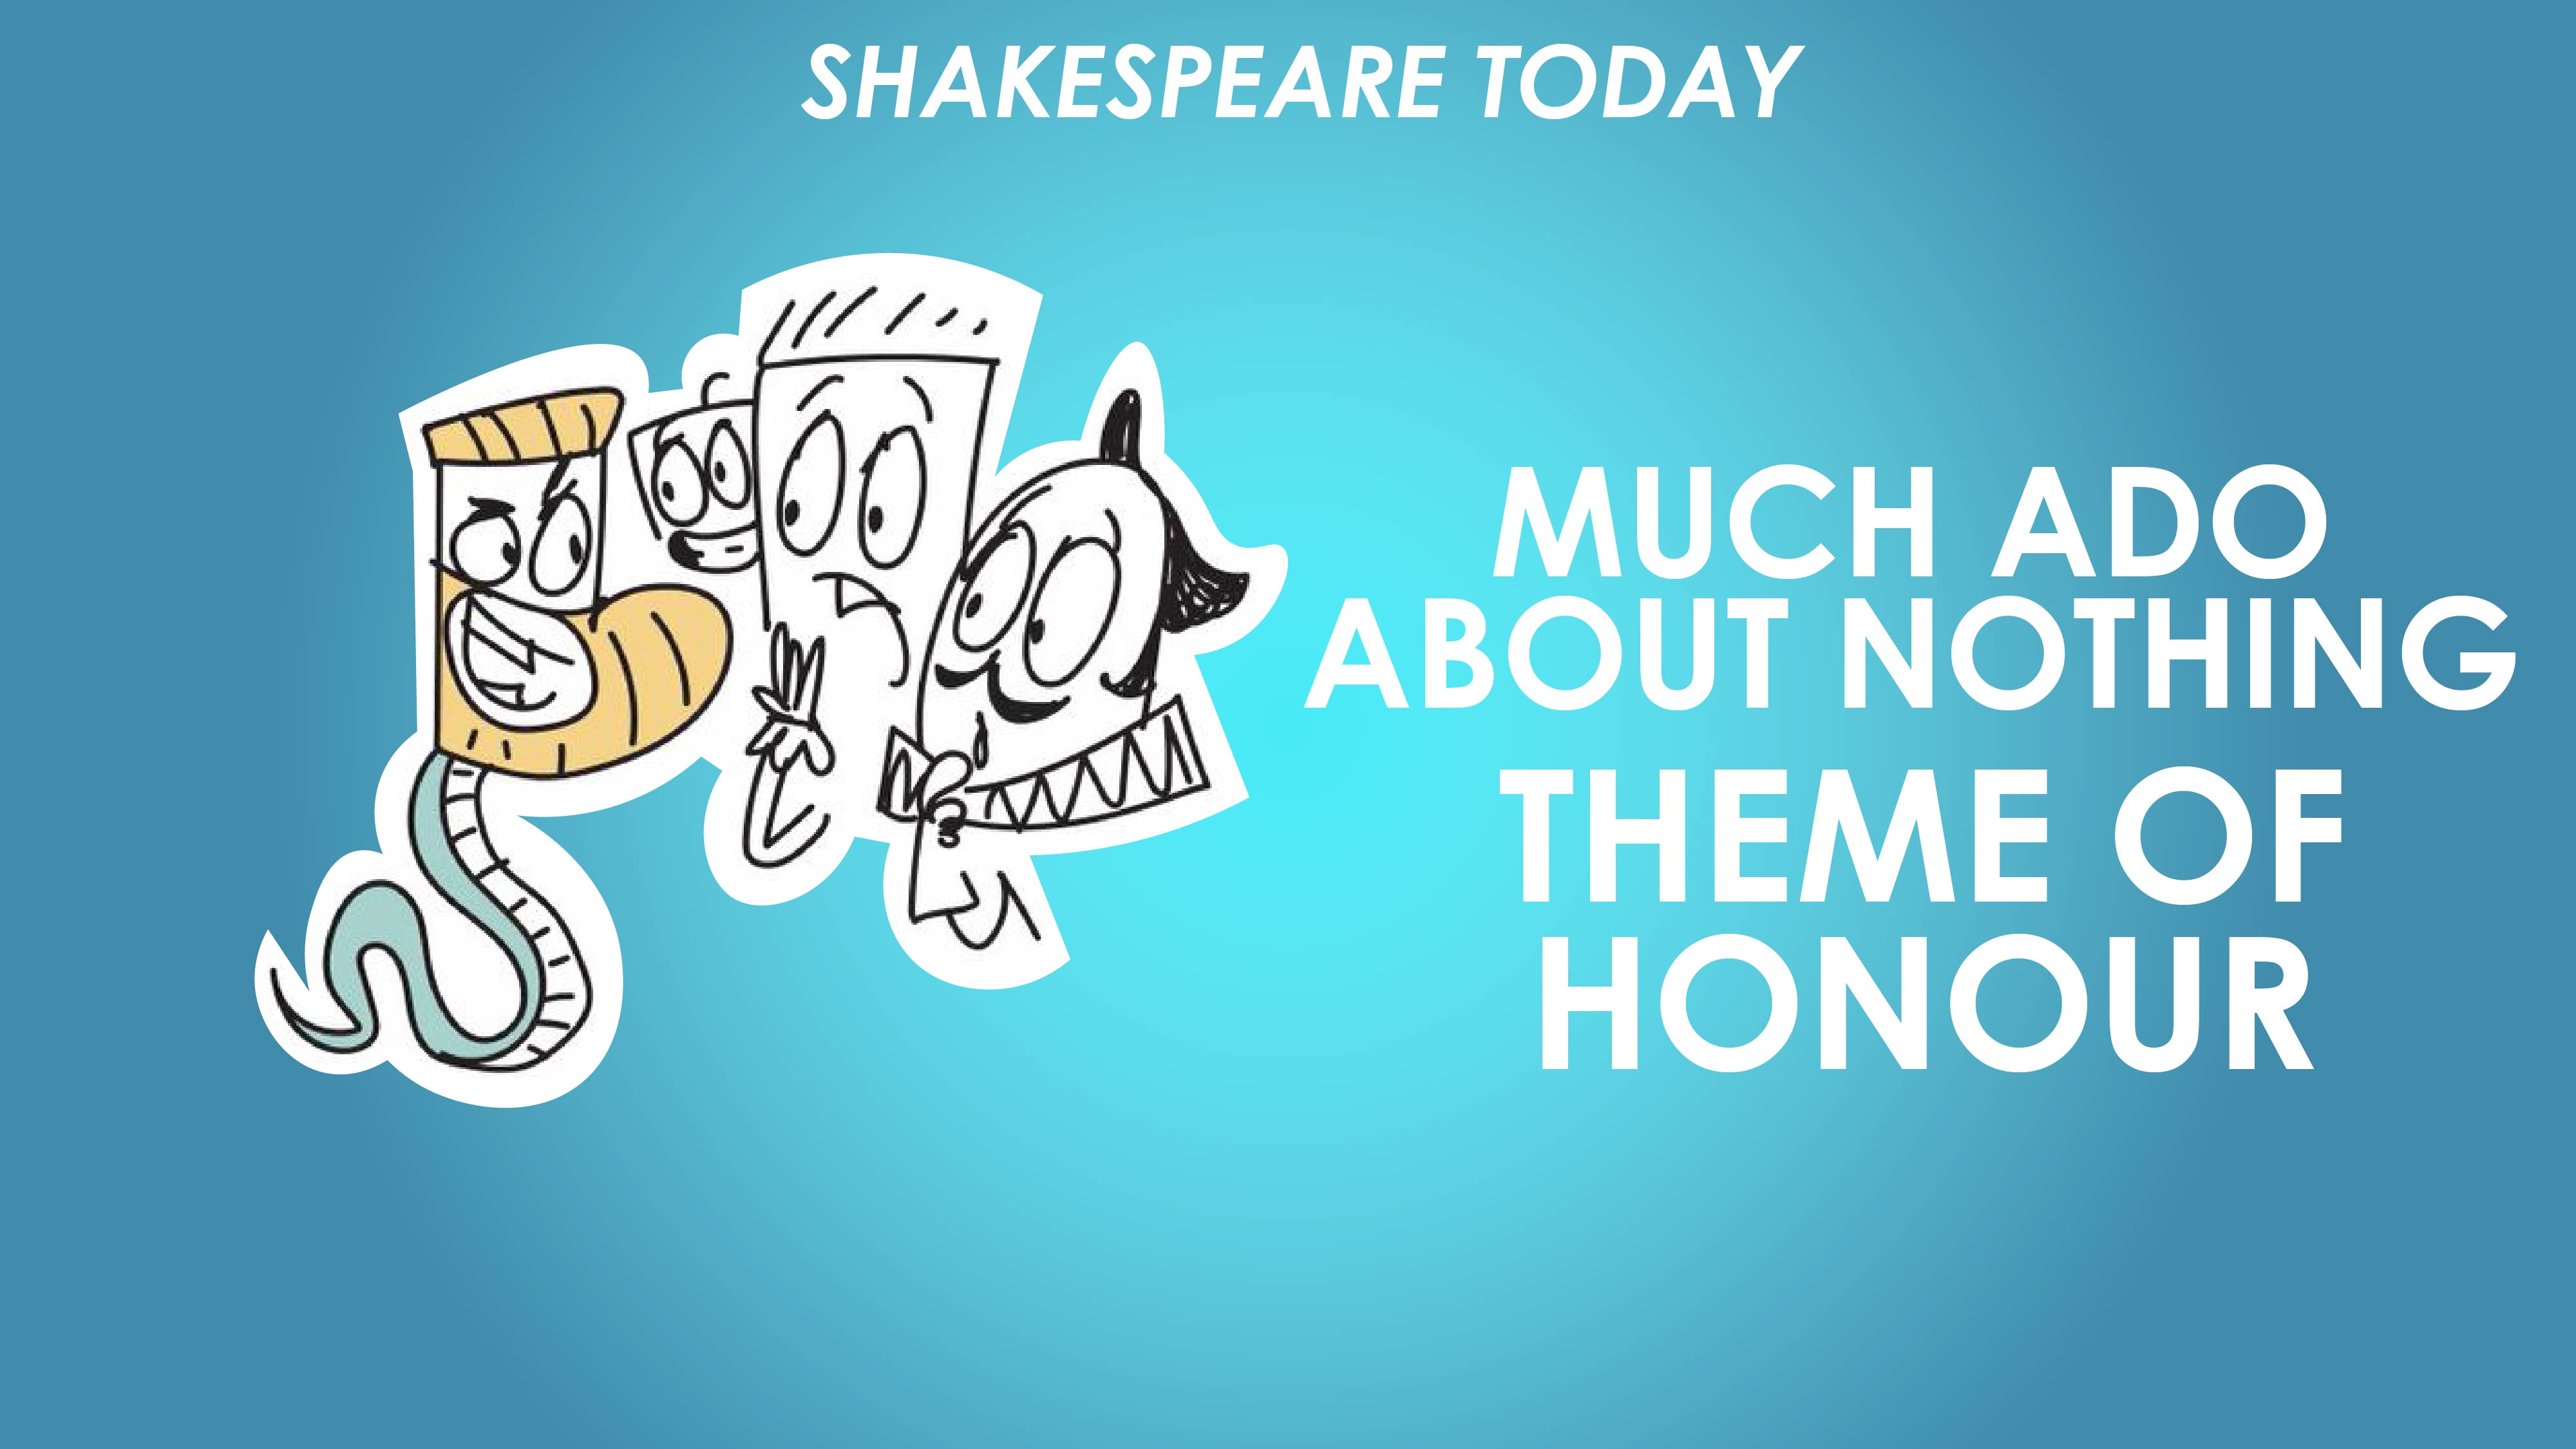 Much Ado About Nothing Theme of Honour - Shakespeare Today Series 